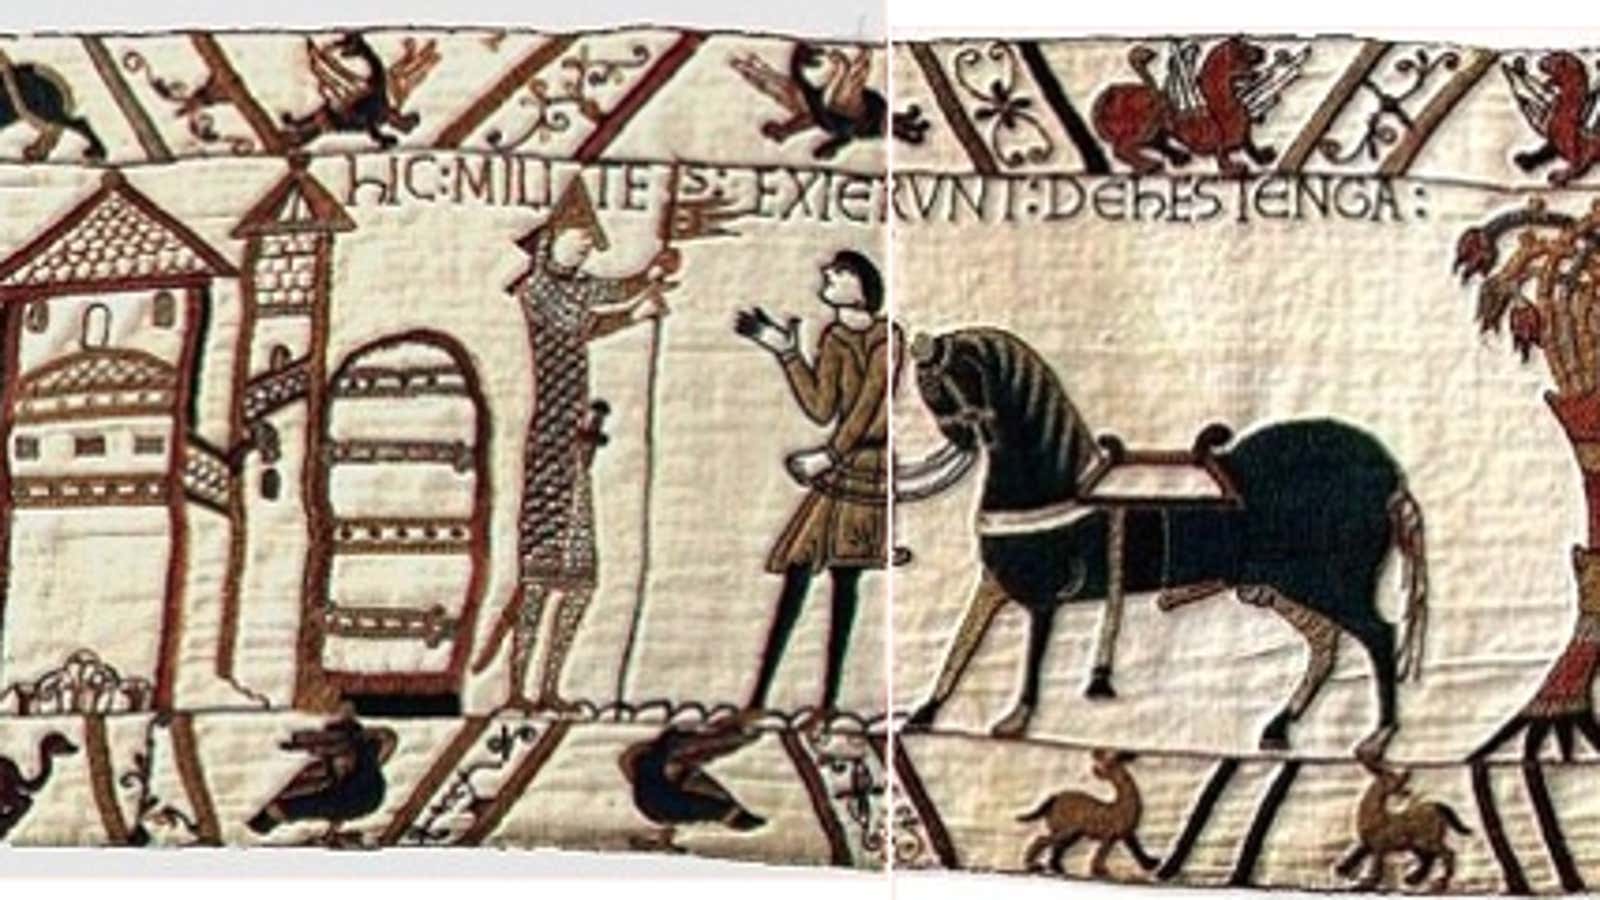 The horse presented to William the Conquerer has an especially large penis.